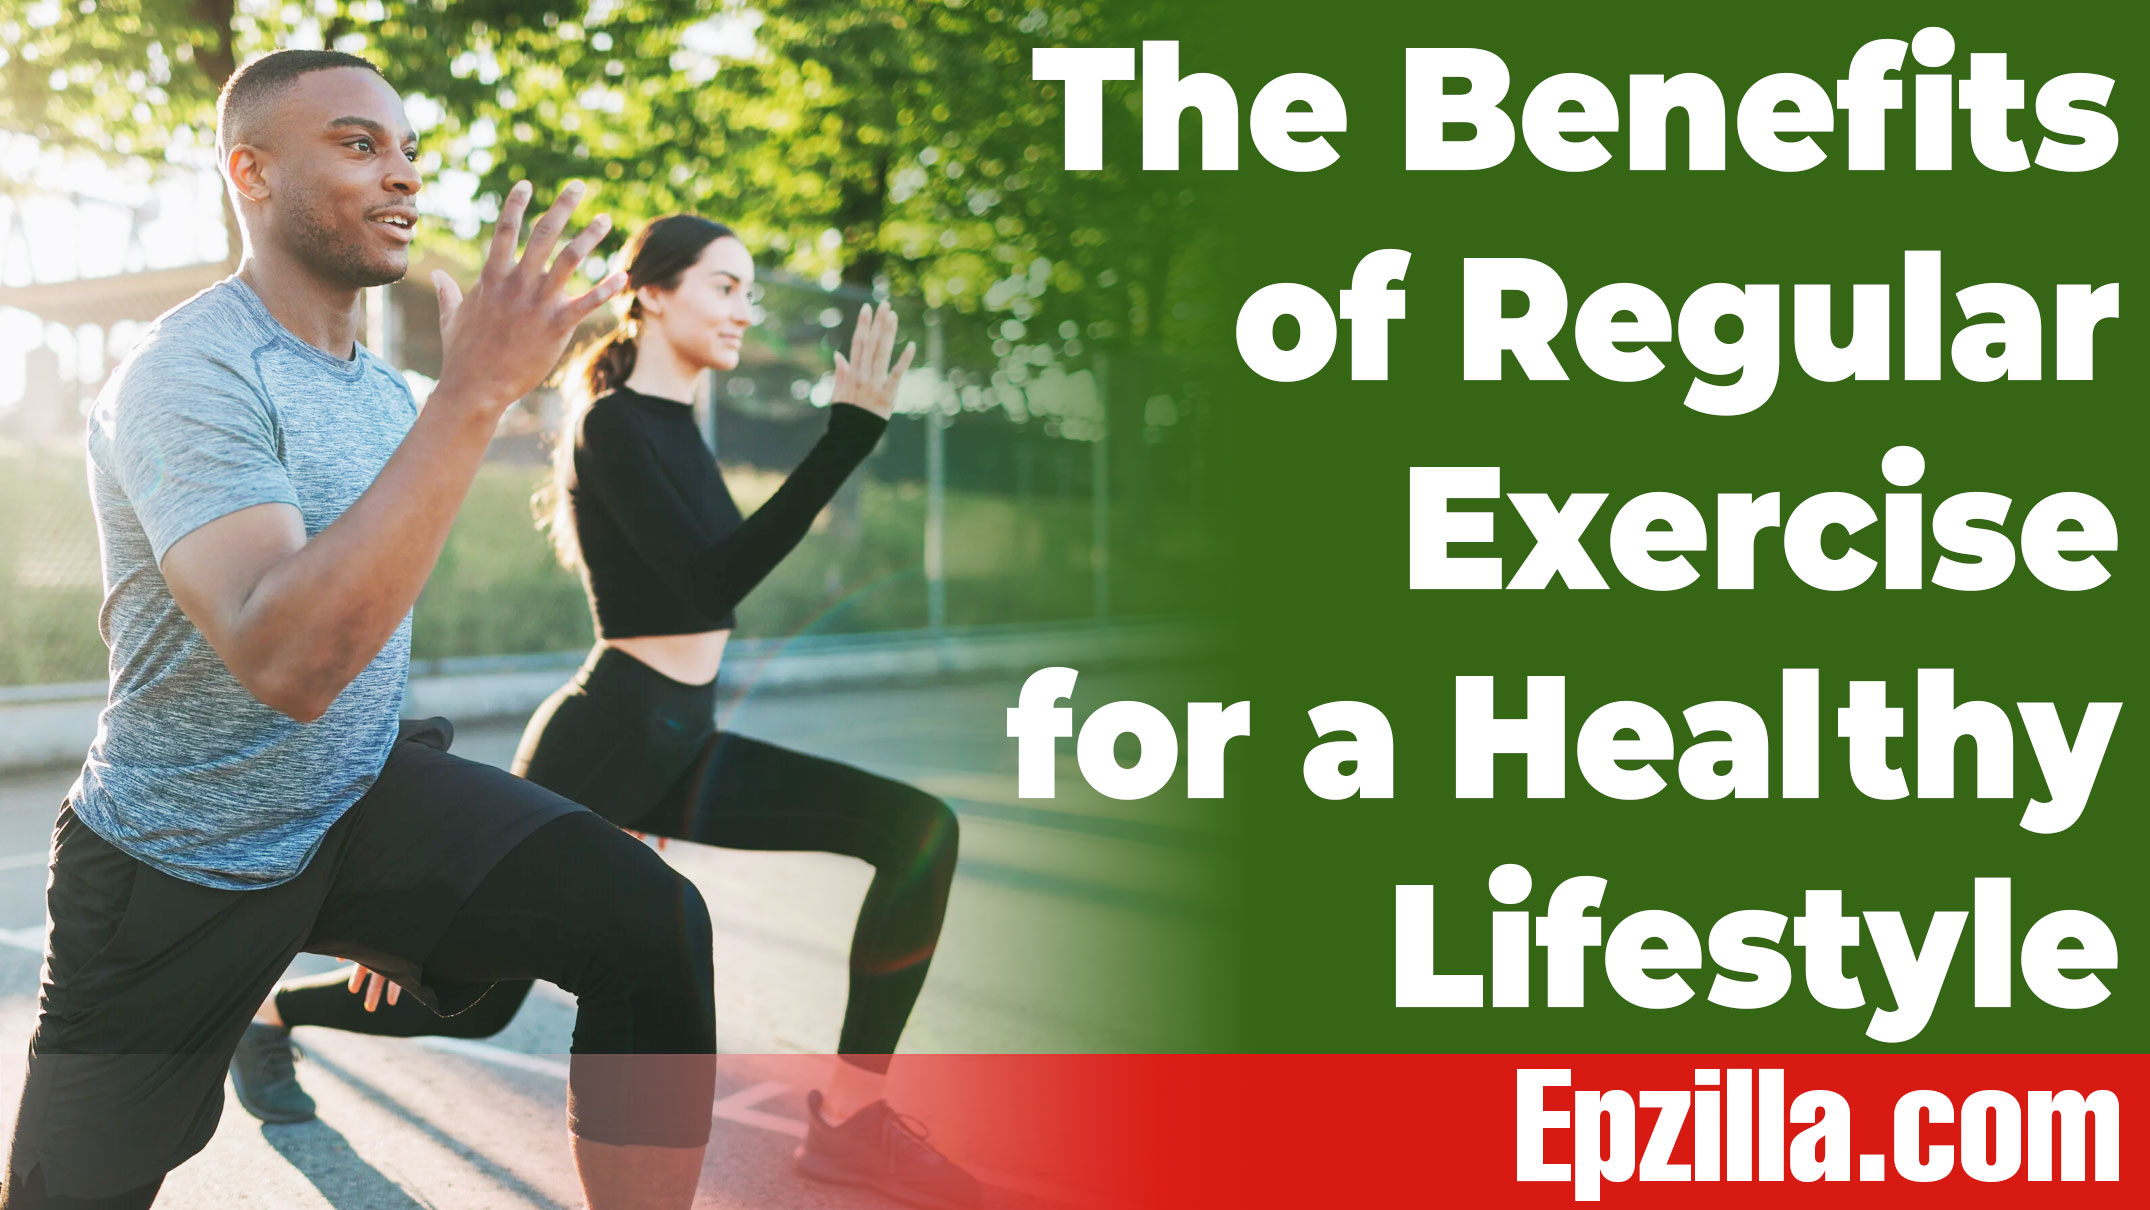 The Benefits of Regular Exercise for a Healthy Lifestyle Epzilla.com